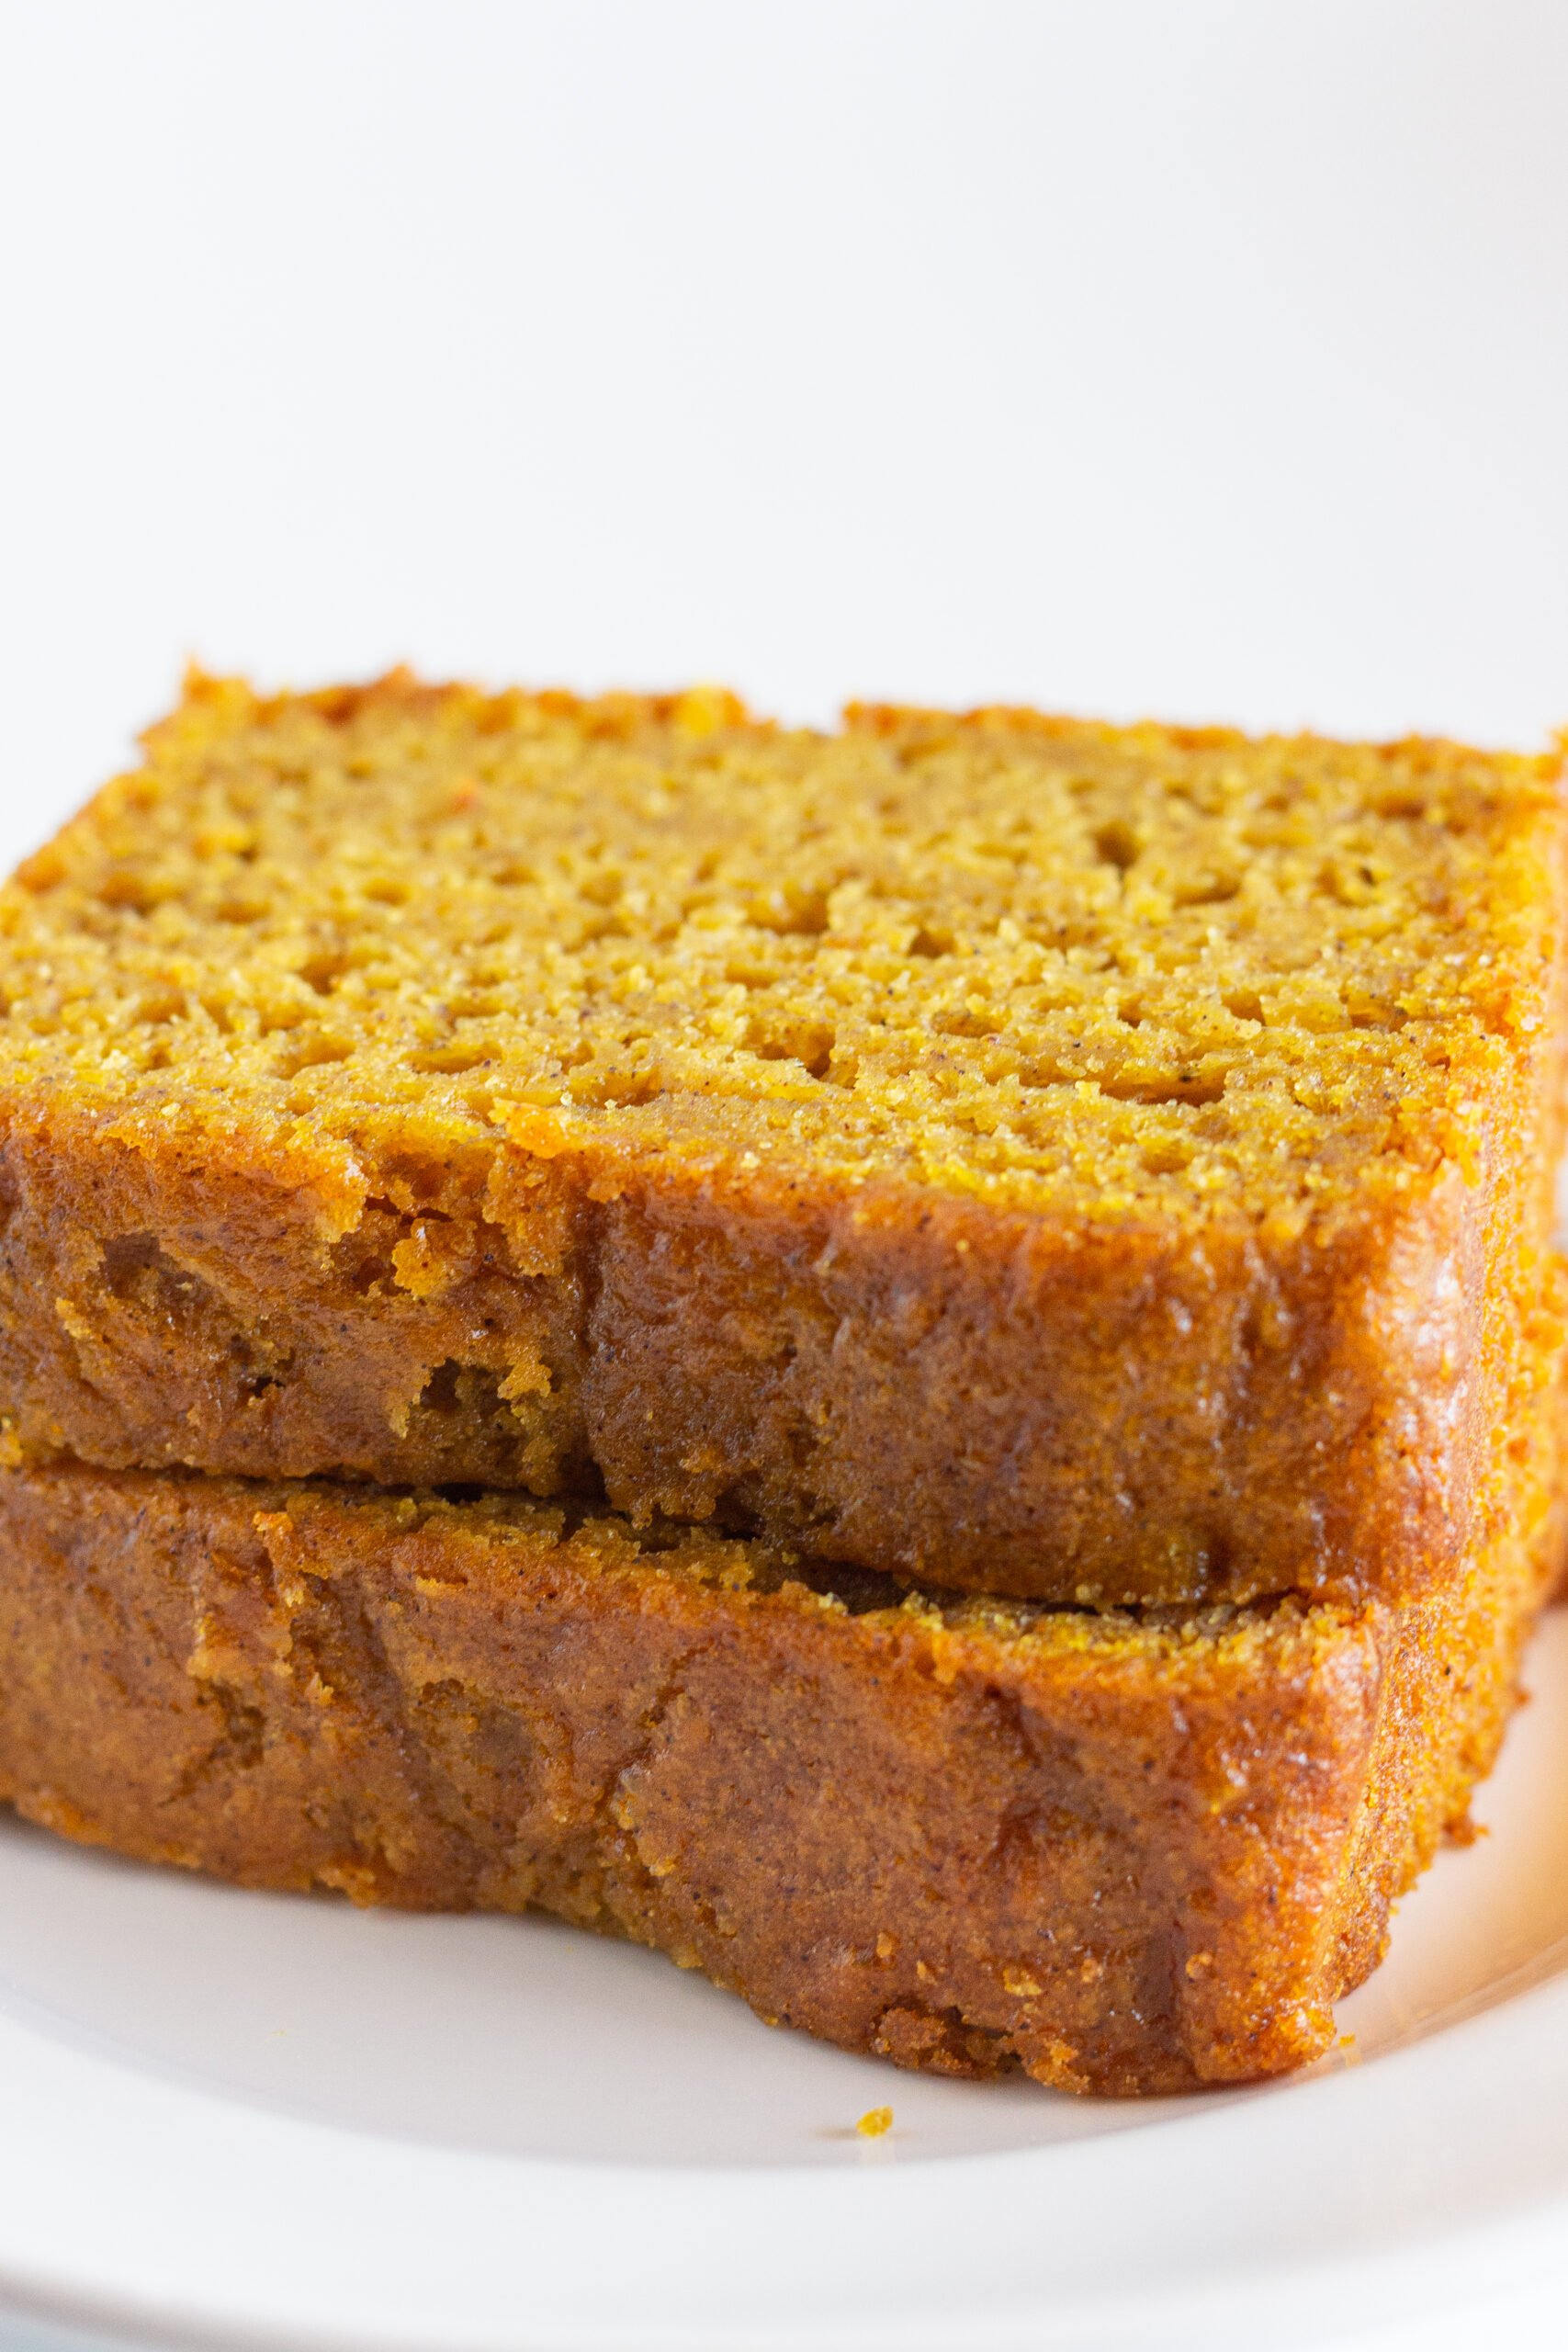 Two slices of pumpkin bread stacked on top of each other on a white plate.